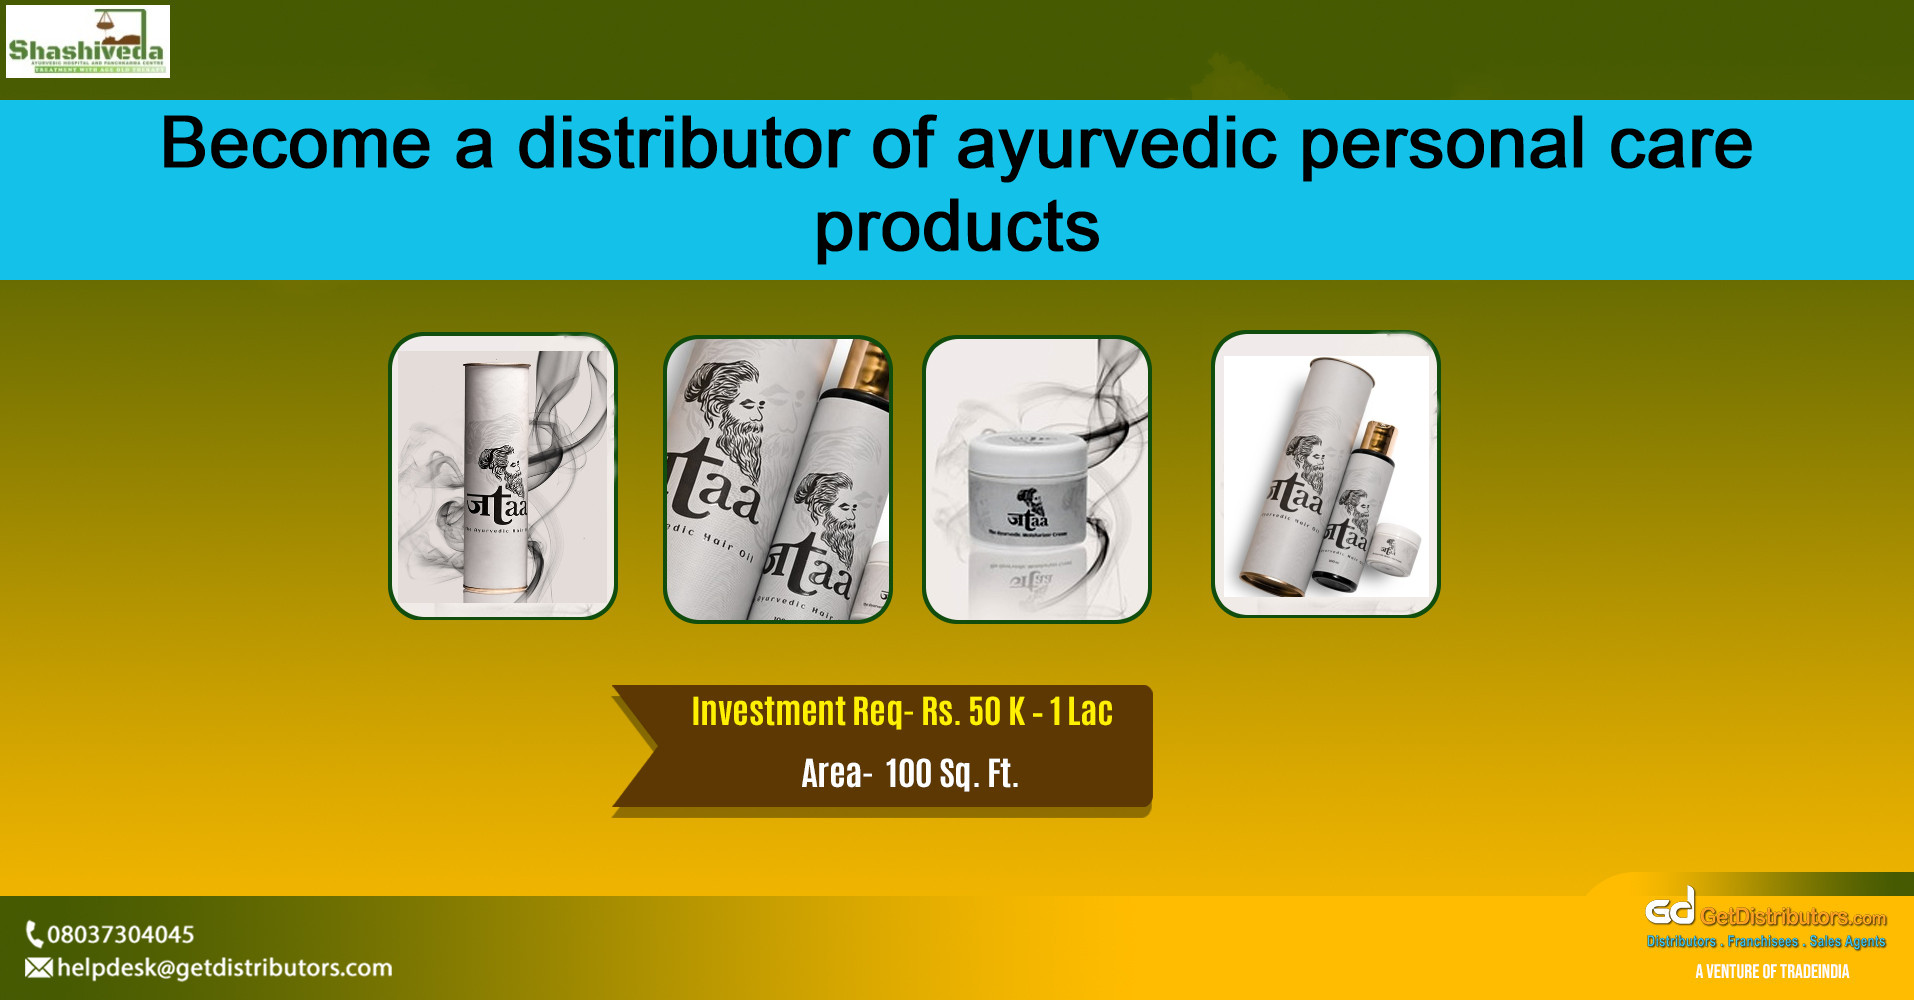 Become a distributor of ayurvedic personal care products